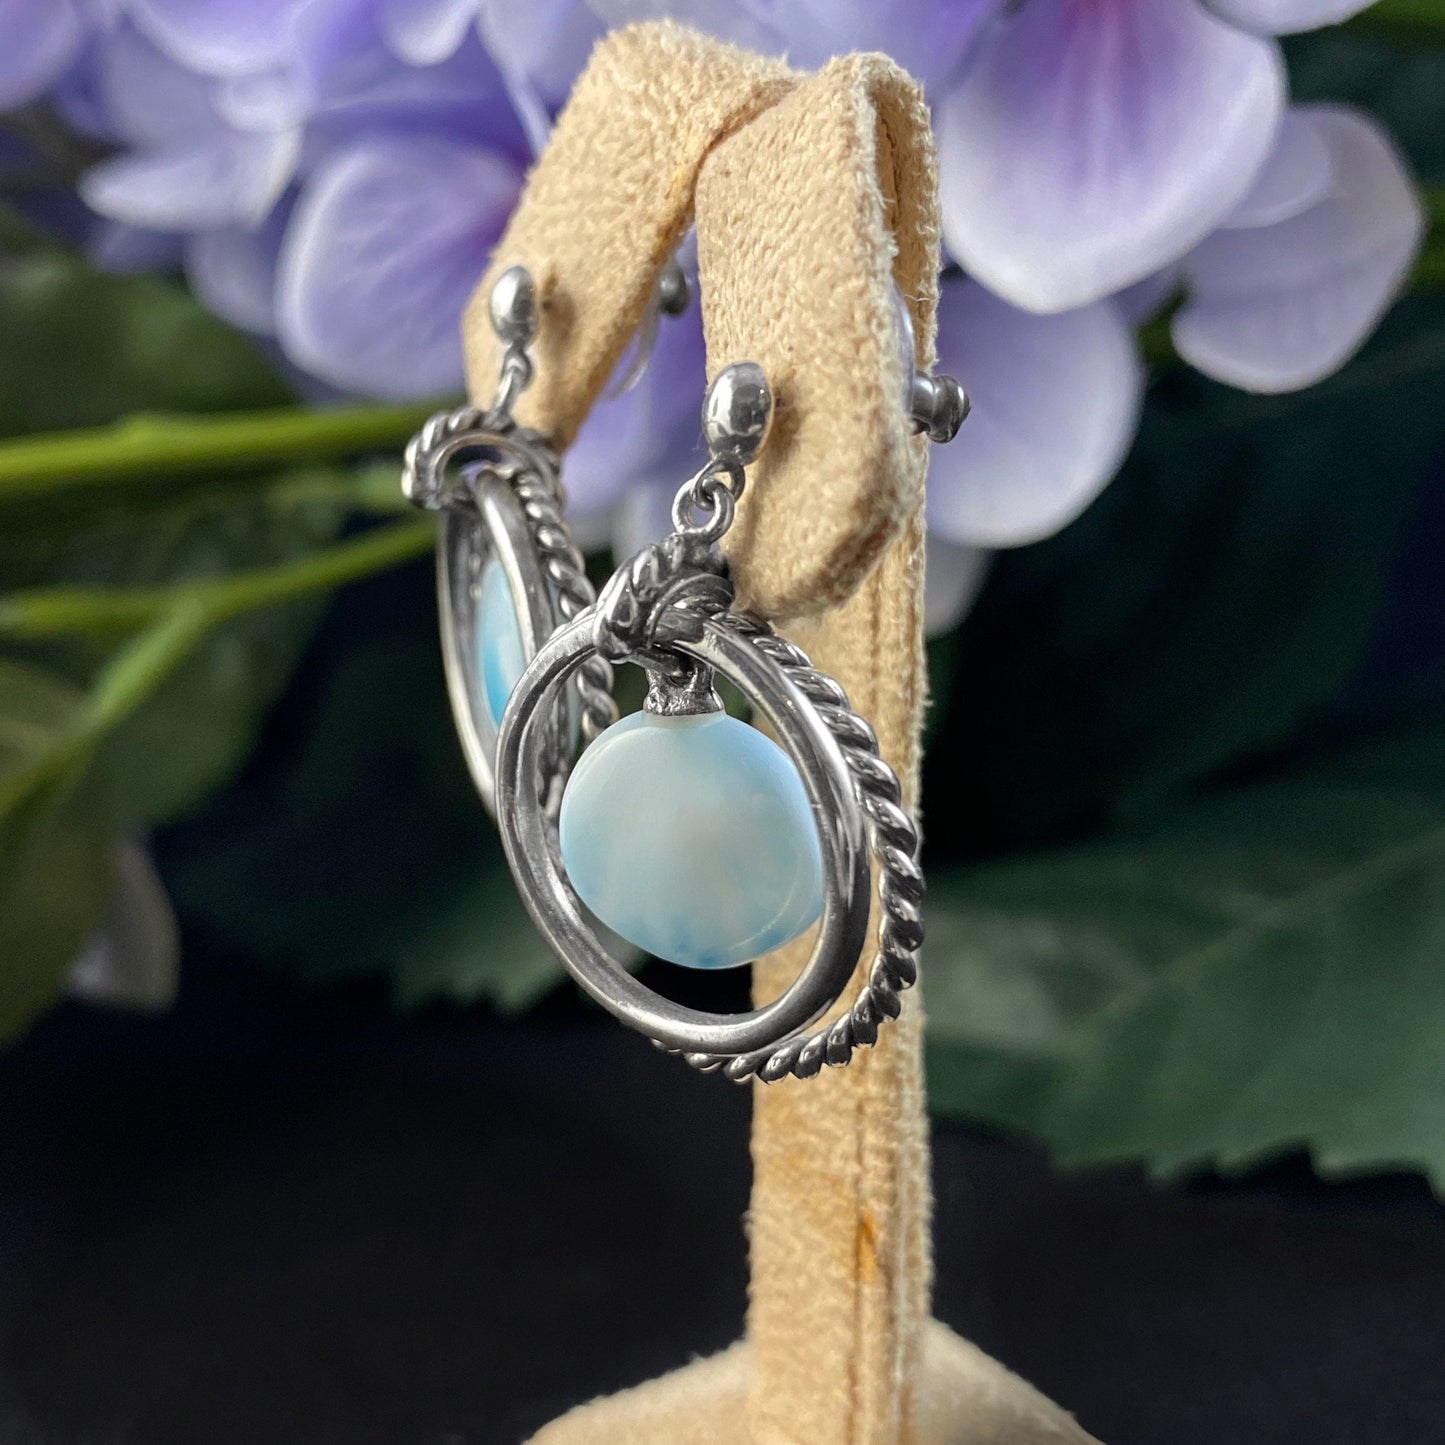 Marahlago Larimar and Sterling Silver Ciro Earrings